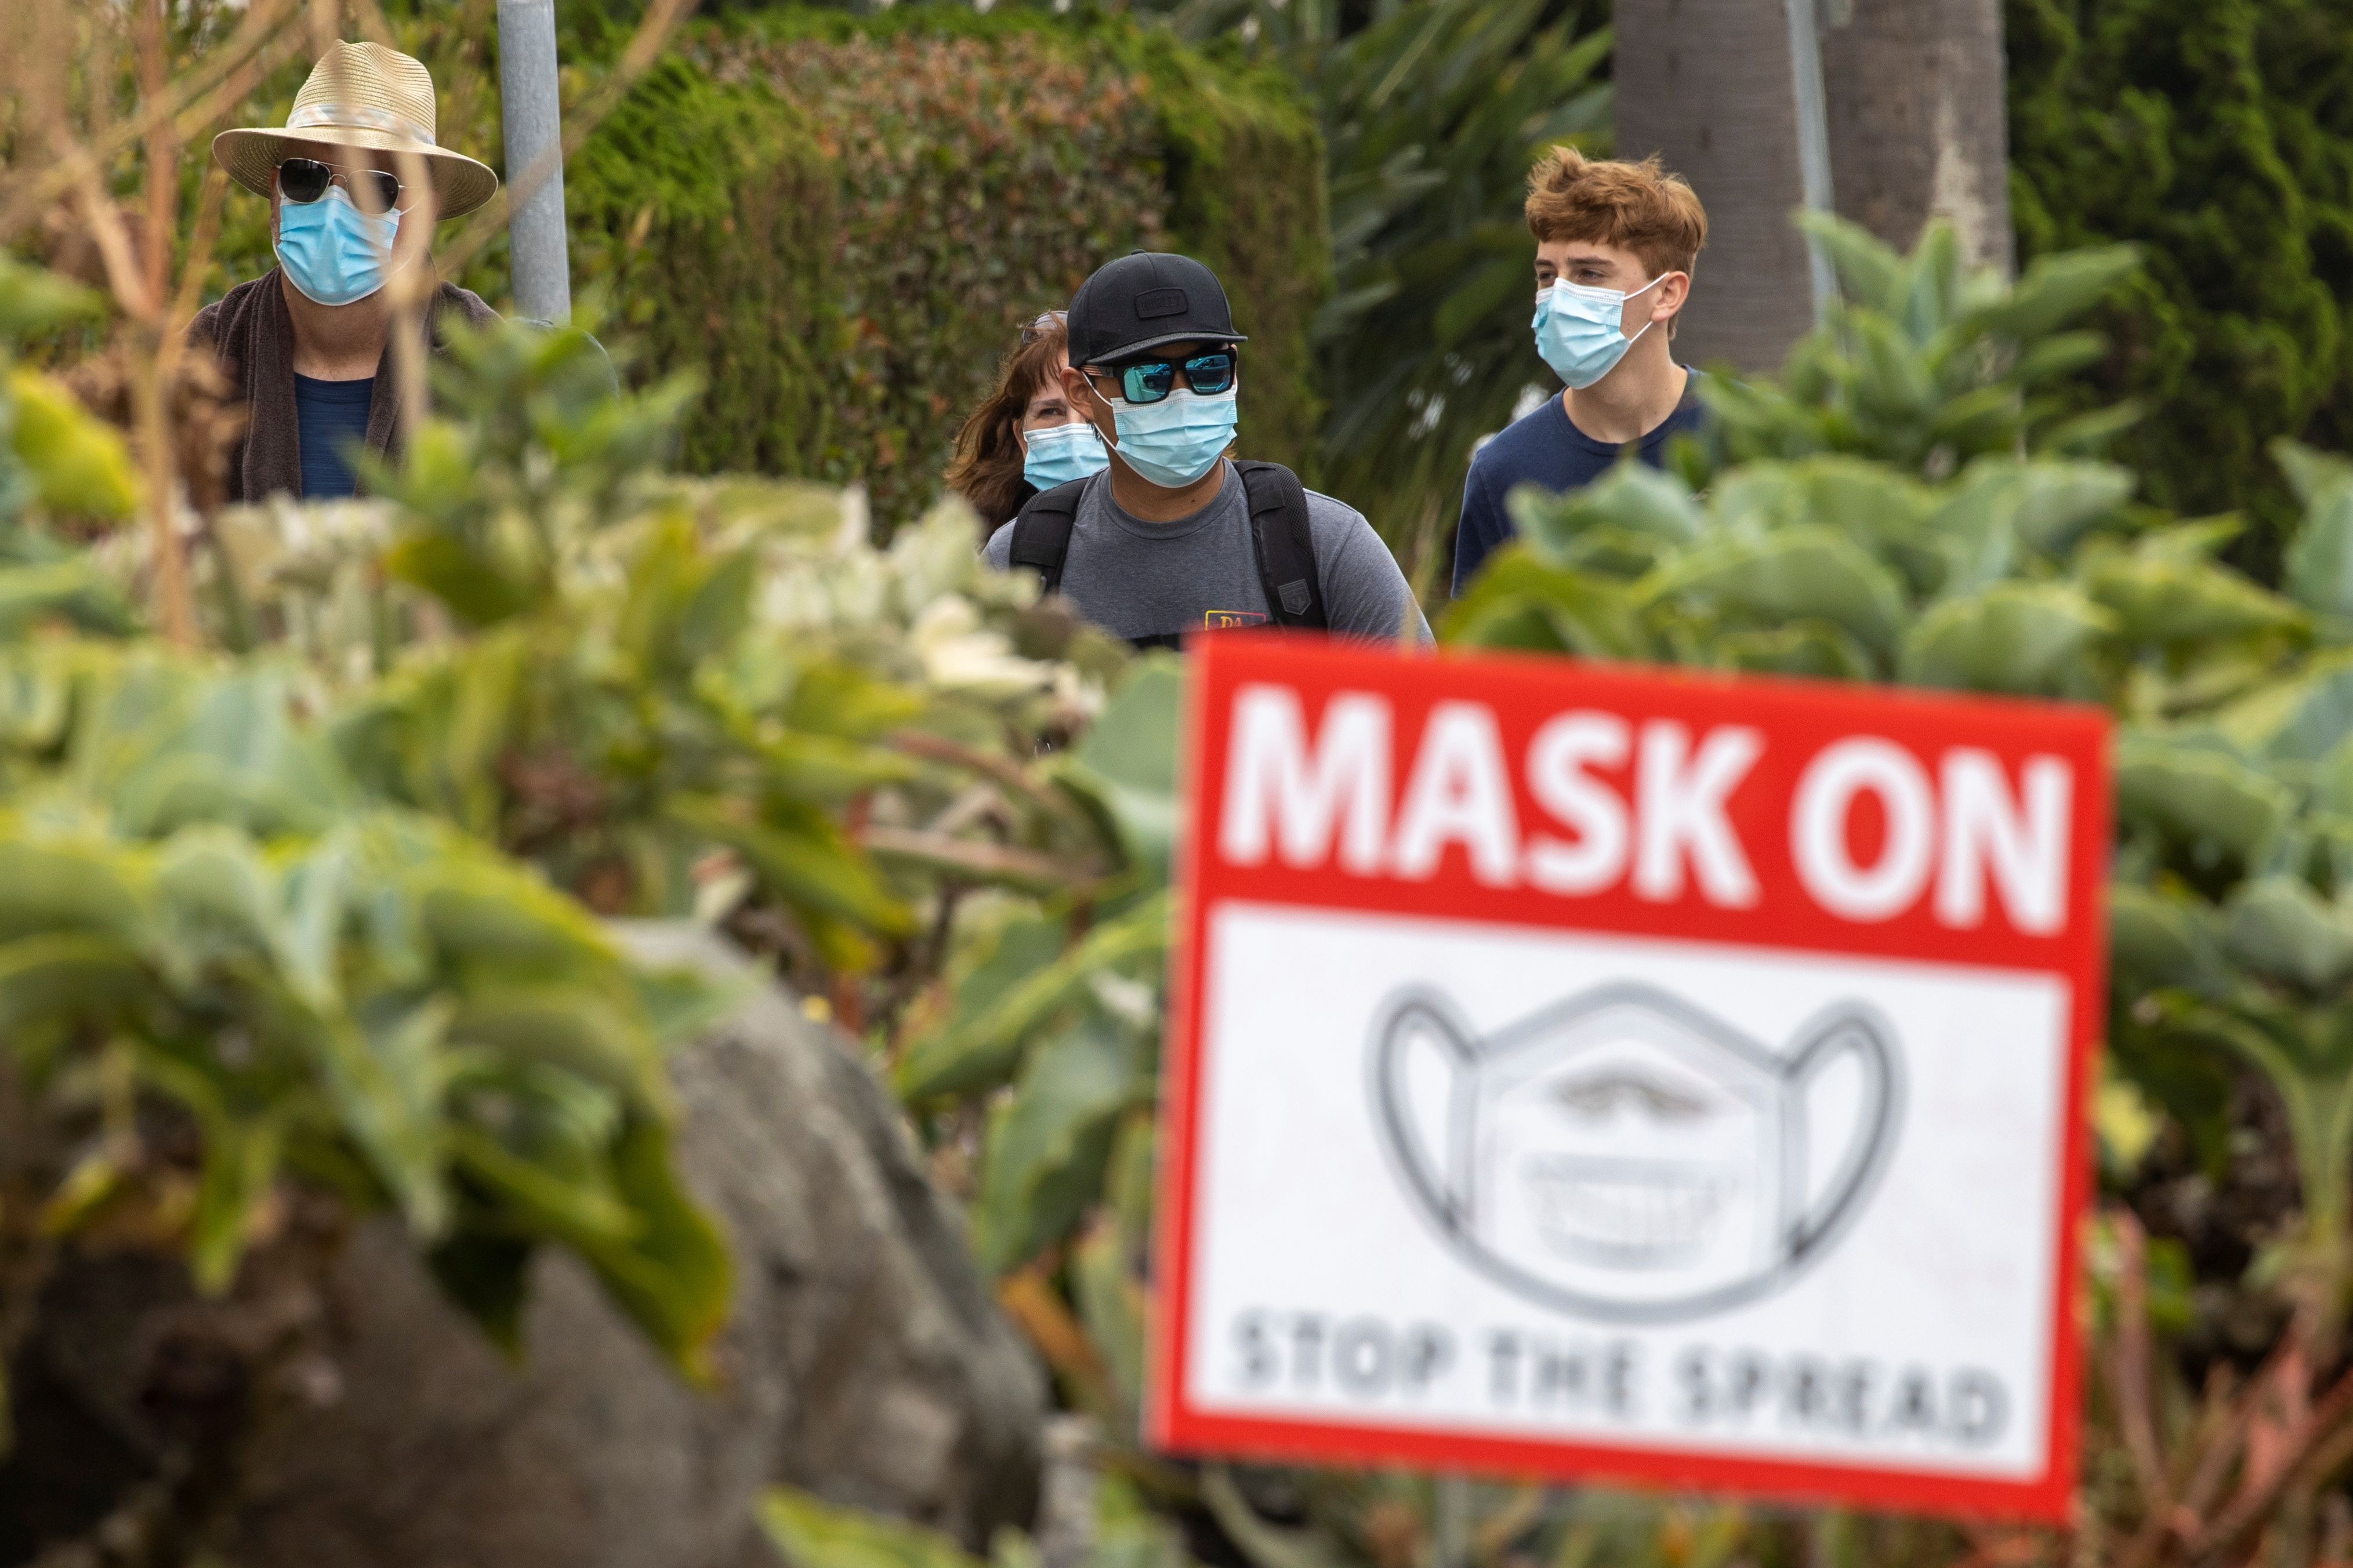 People wear masks as they walk along the side walk during the outbreak of the coronavirus disease in California